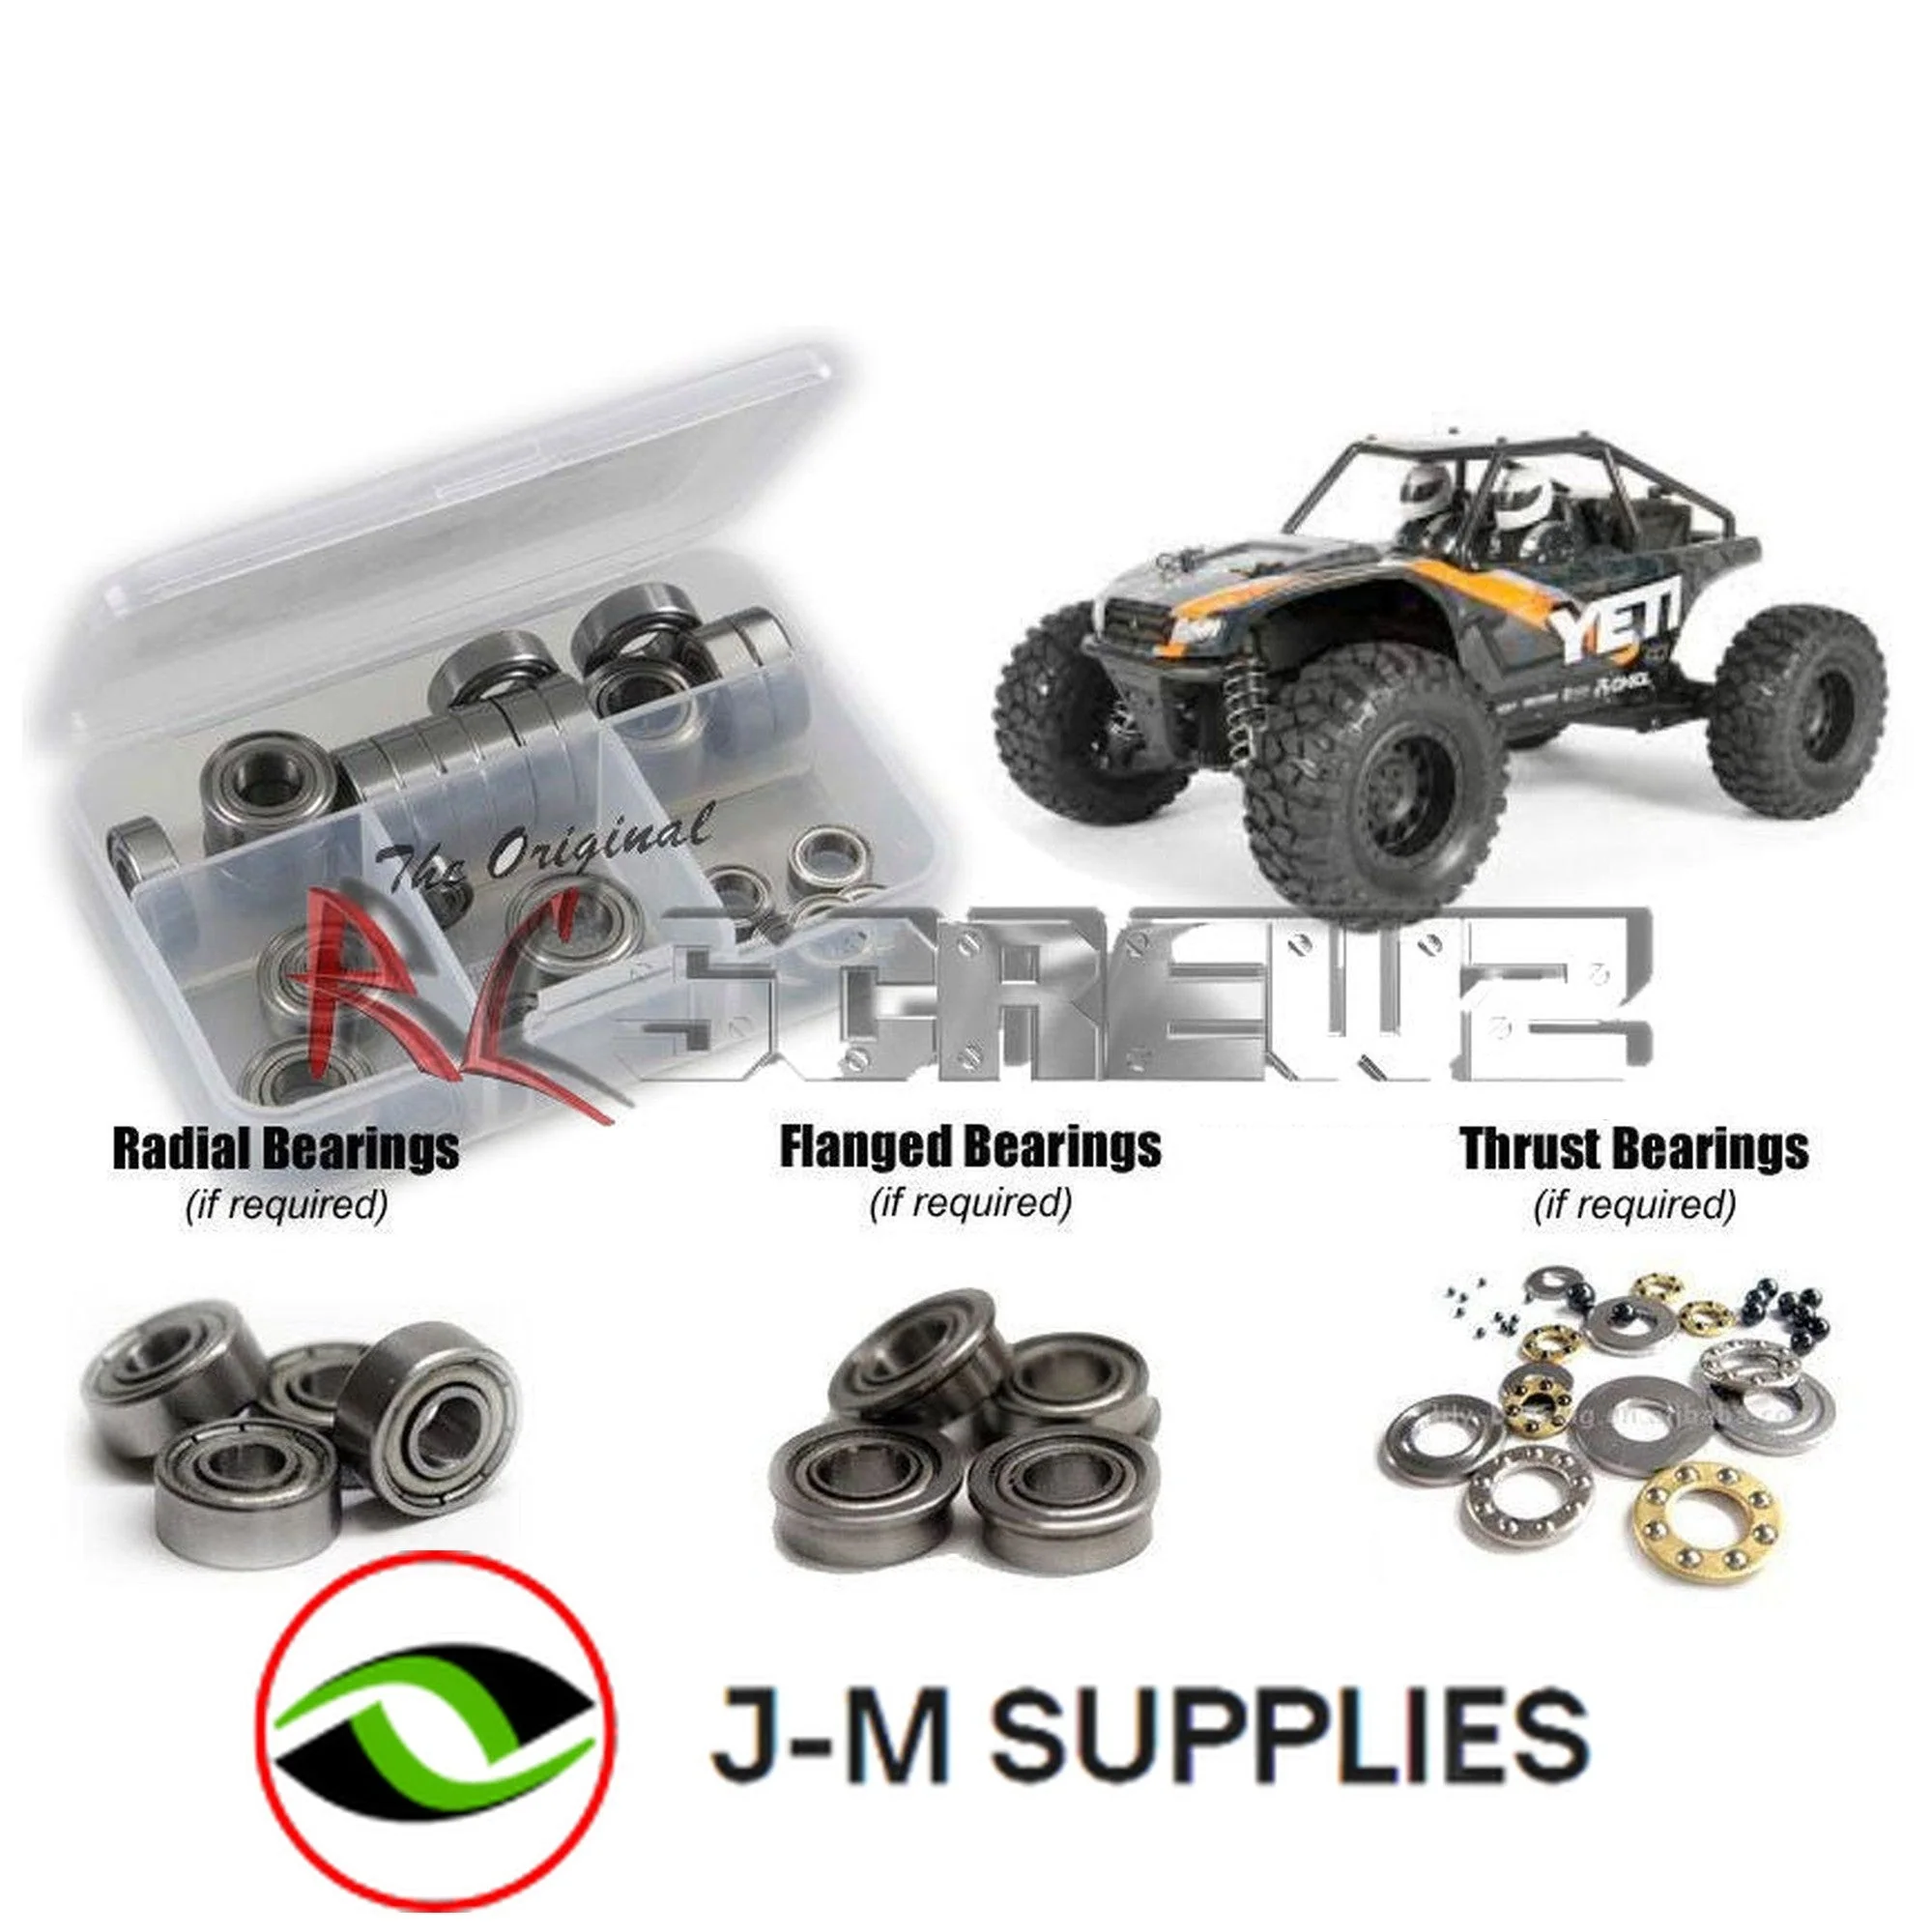 RCScrewZ Metal Shielded Bearings axi026b for Axial Racing Yeti Jr. 1/18th #90054 - Picture 1 of 12